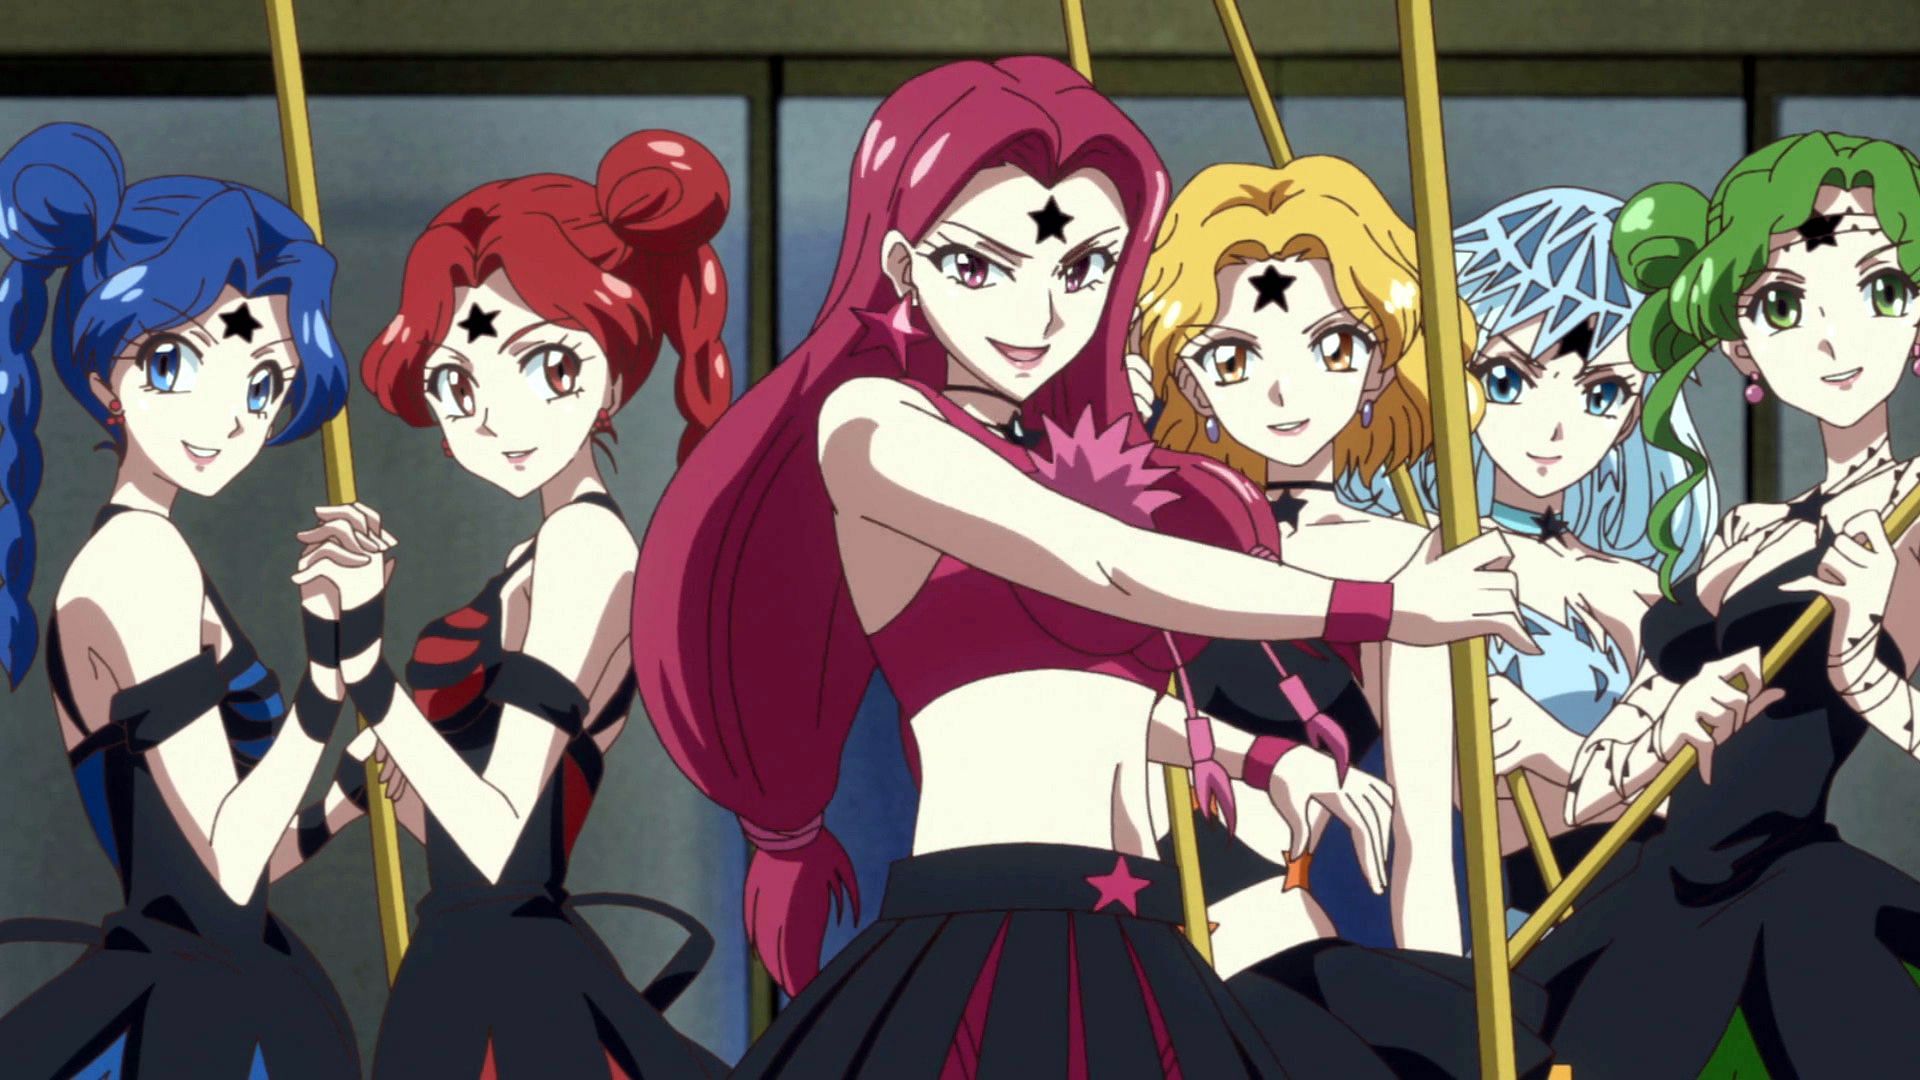 The Witches 5 (Image by Toei Animation)